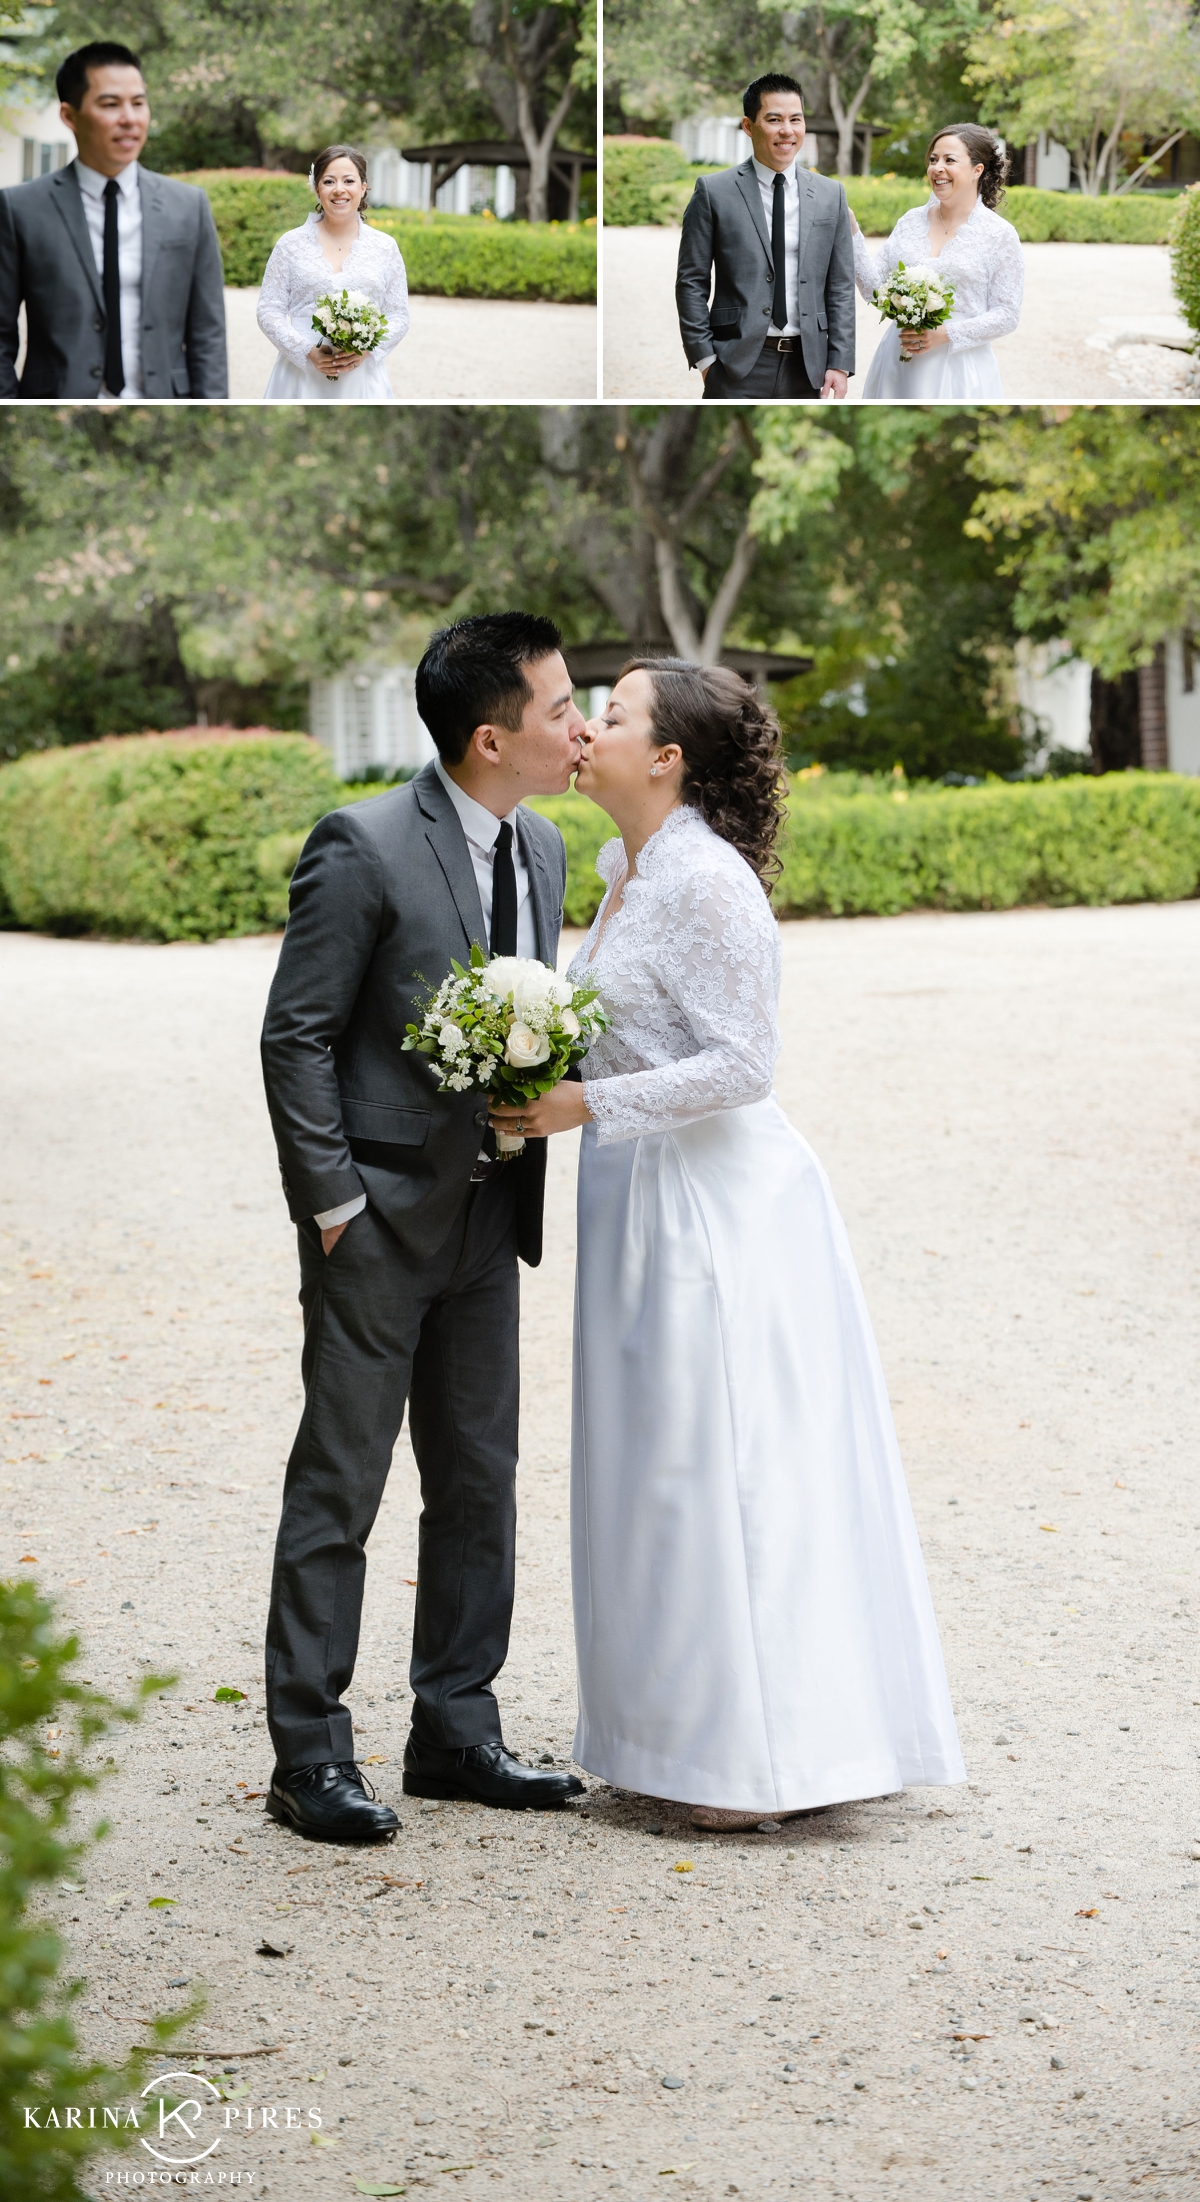 Orcutt Ranch Horticulture Center Wedding – Los Angeles Wedding Photographer